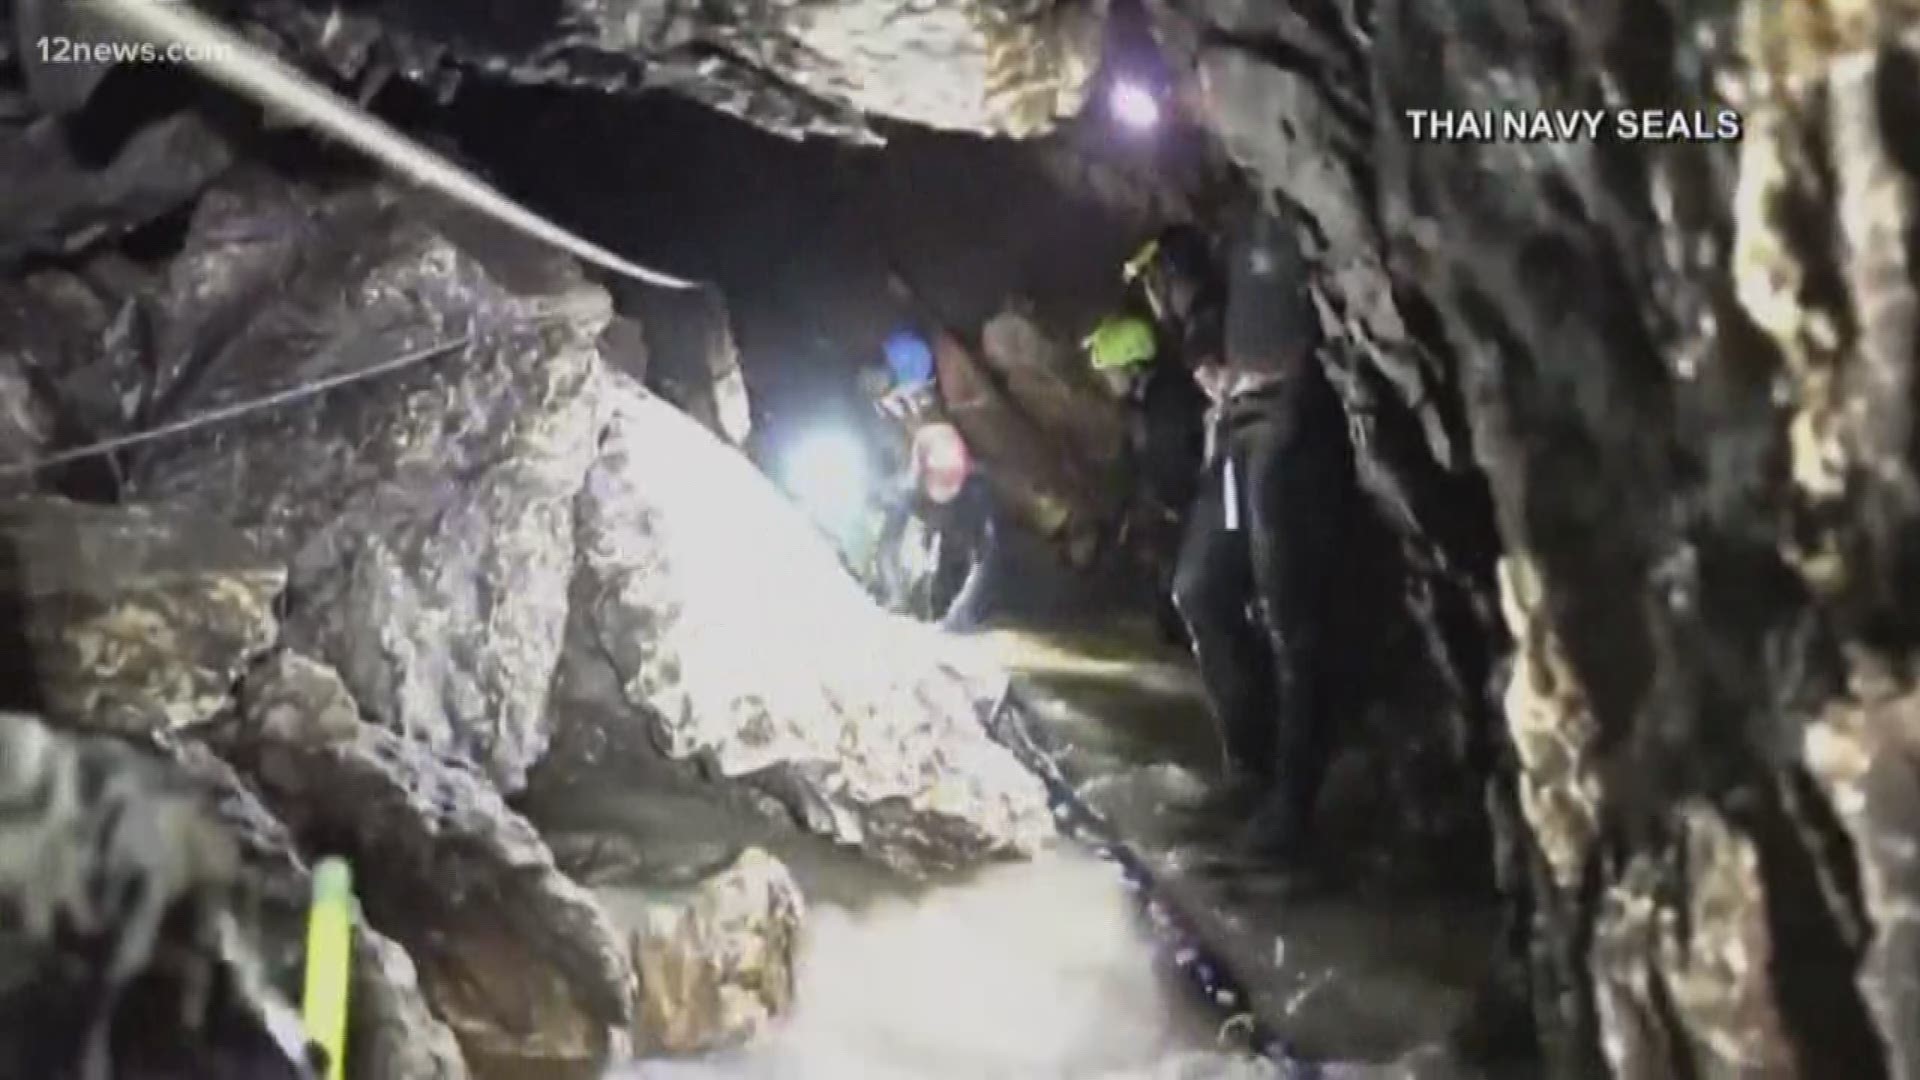 The world was riveted by the rescue of a Thai soccer team who were stuck in a cave, so why not make a movie about it? Well, a production company in Scottsdale is already working on it.